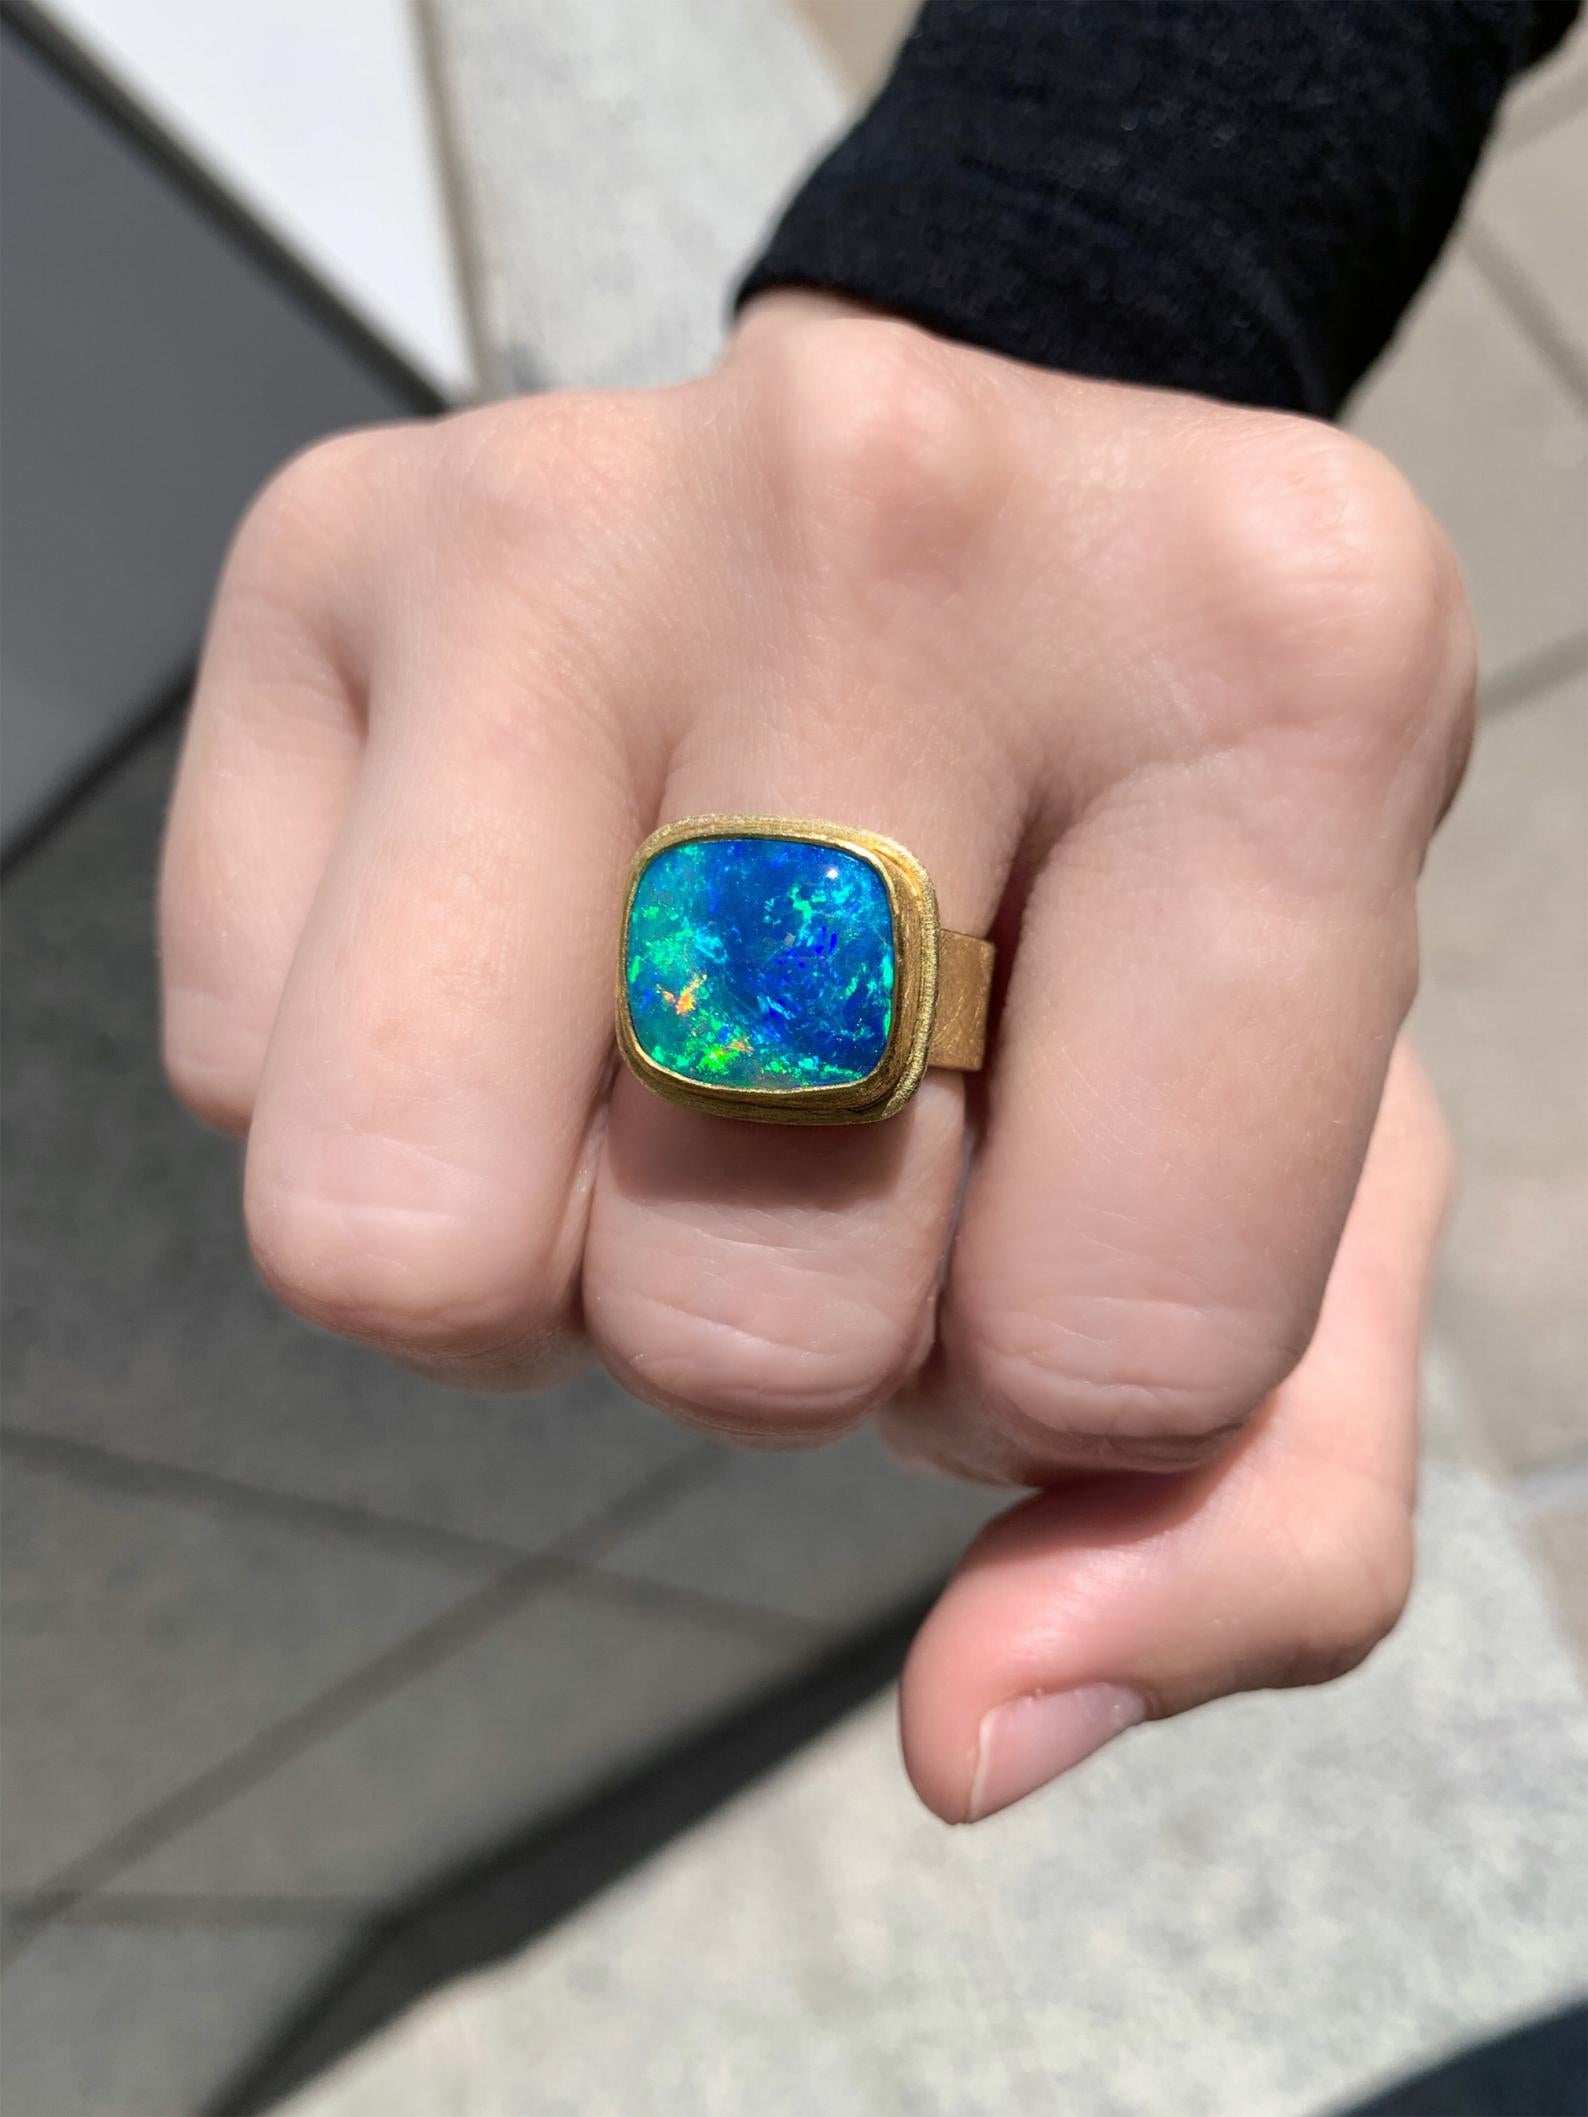 Double Framed Ring handmade by award-winning jewelry artist Petra Class featuring a spectacular, magical Australian crystal opal free-form cabochon bezel-set and double-framed in the maker's signature finely-textured 22k yellow gold atop a 7mm wide